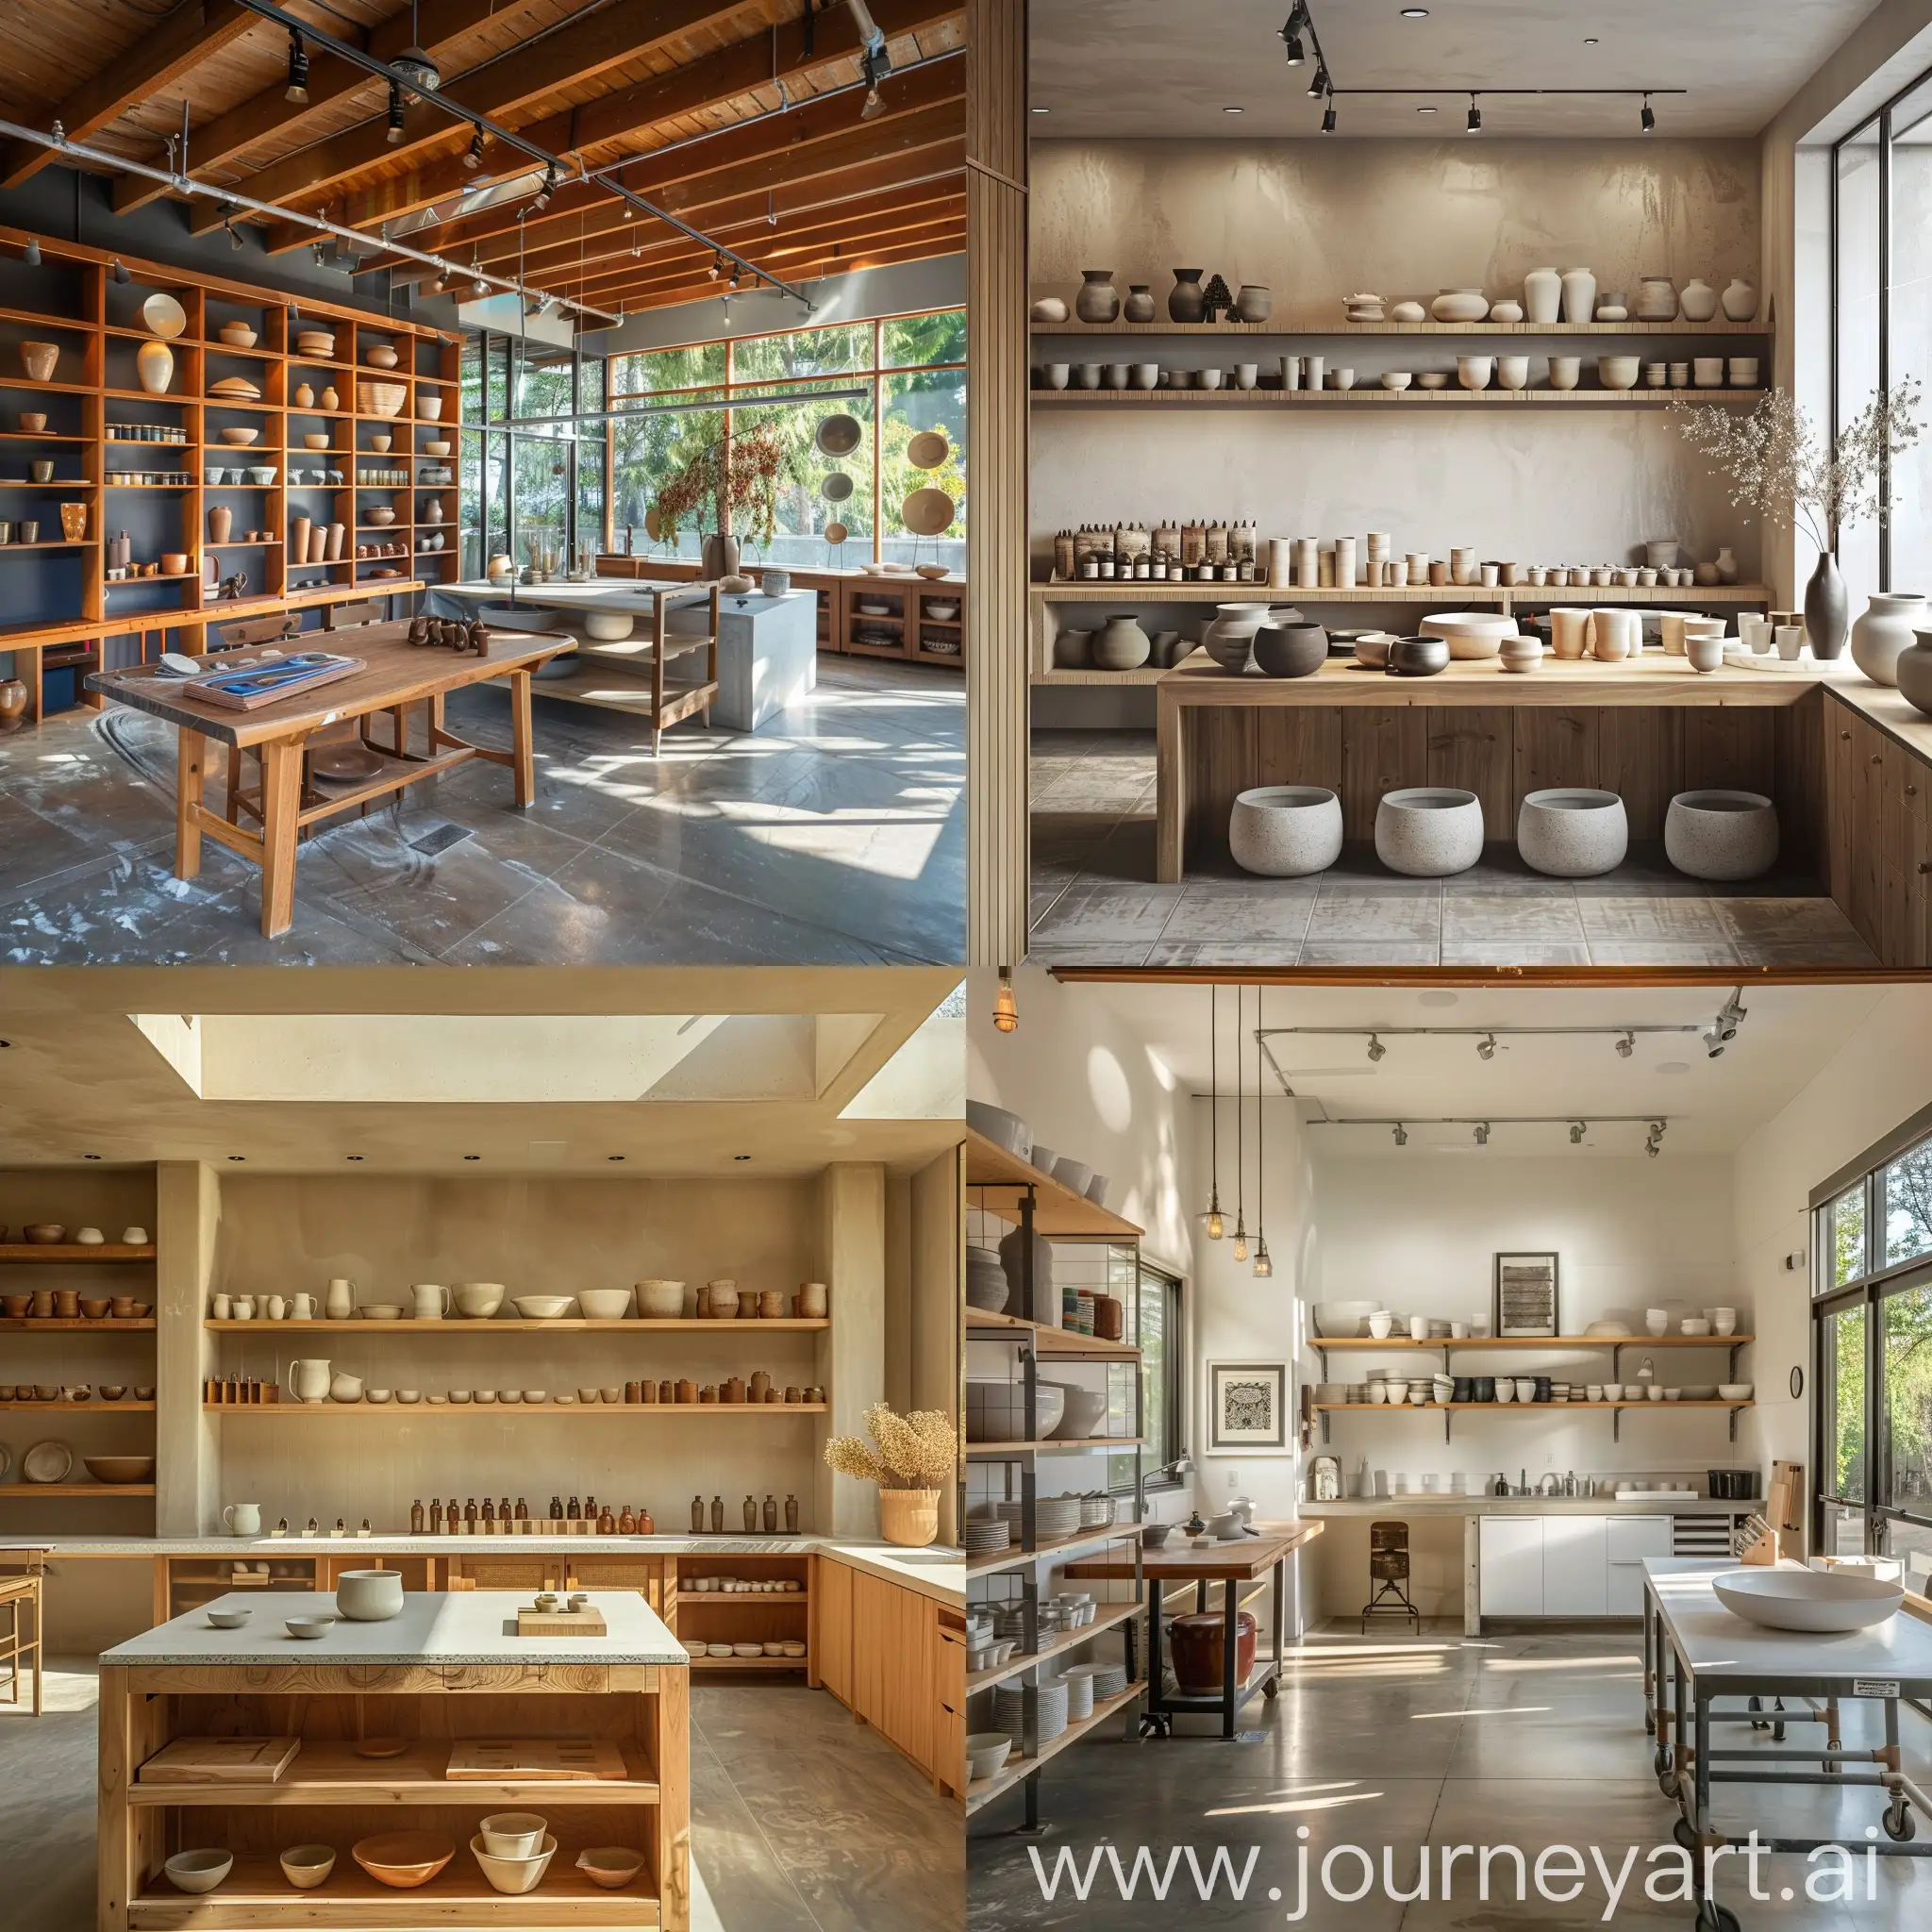  Designing a ceramic or pottery studio with a seamless transition in its interior is about creating a space that harmoniously flows from one area to another, embodying the essence of creativity and craftsmanship.